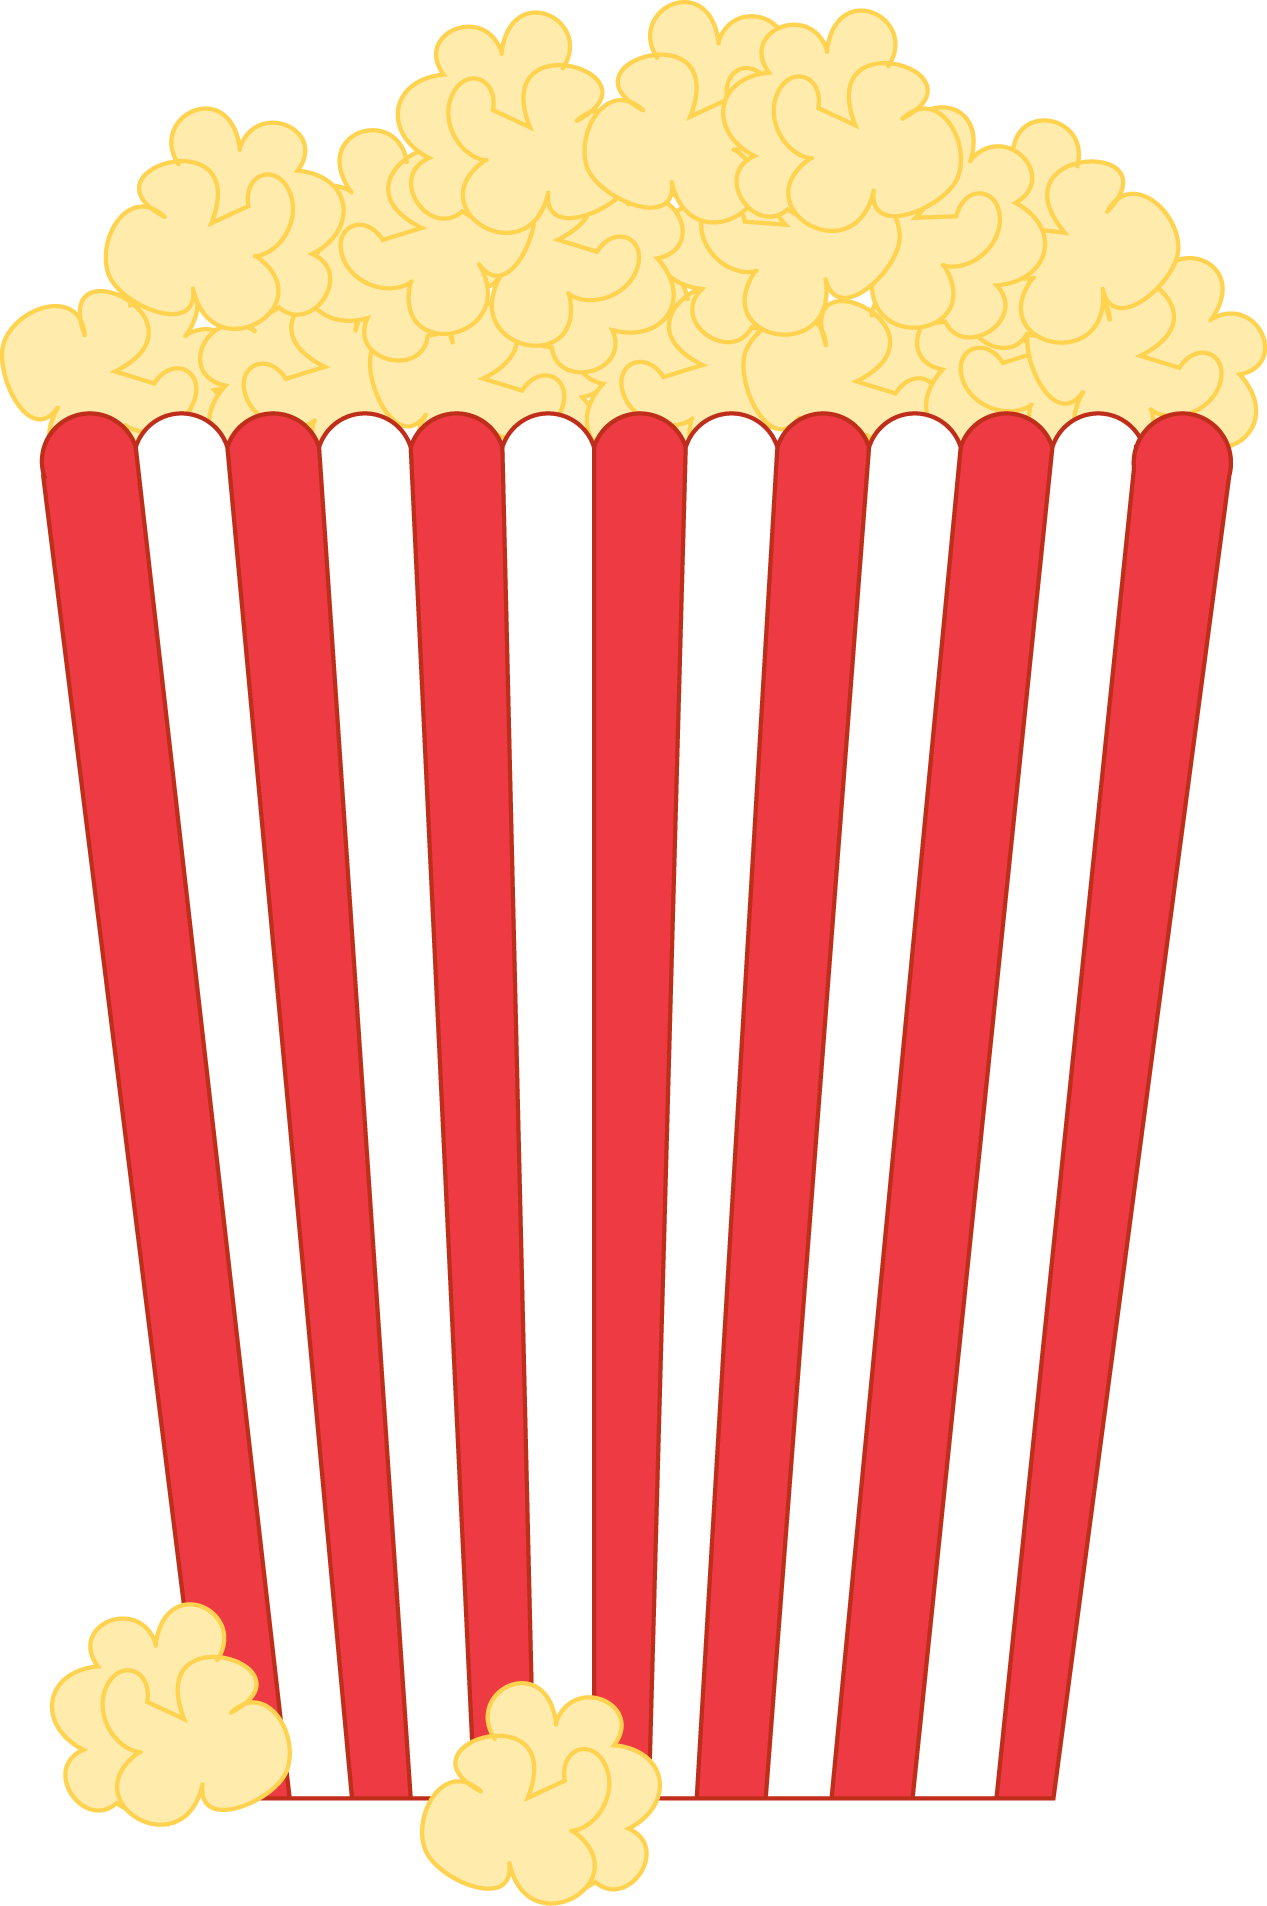 Popcorn bucket clipart black and white 